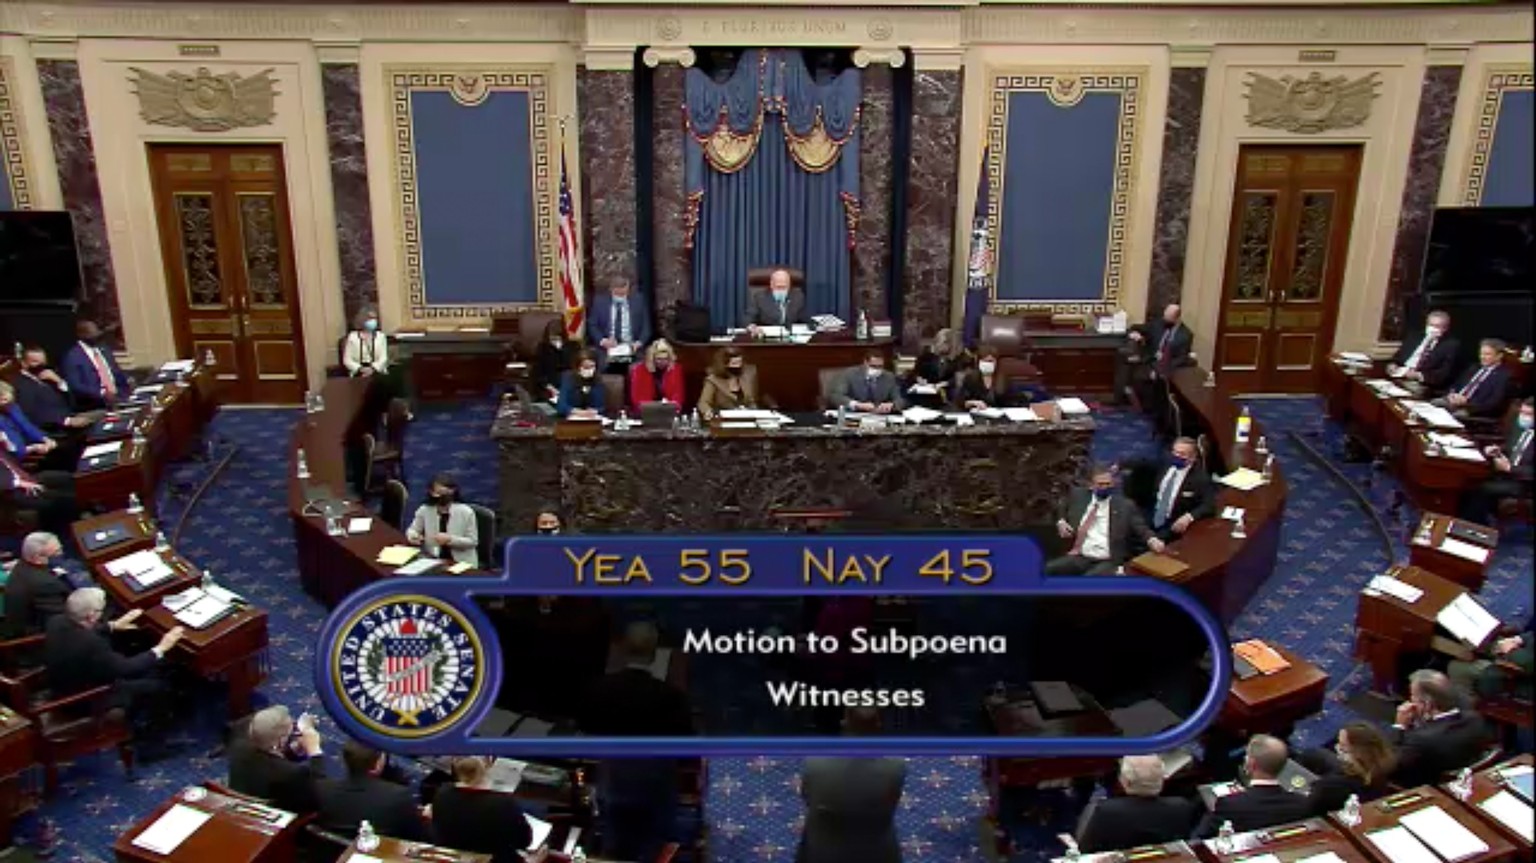 epa09009813 A screen grab from a live broadcast by the Senate TV showing the tally of votes on the Motion to Subpoena Witnesses during the second impeachment trial of former US president Trump at the  ...